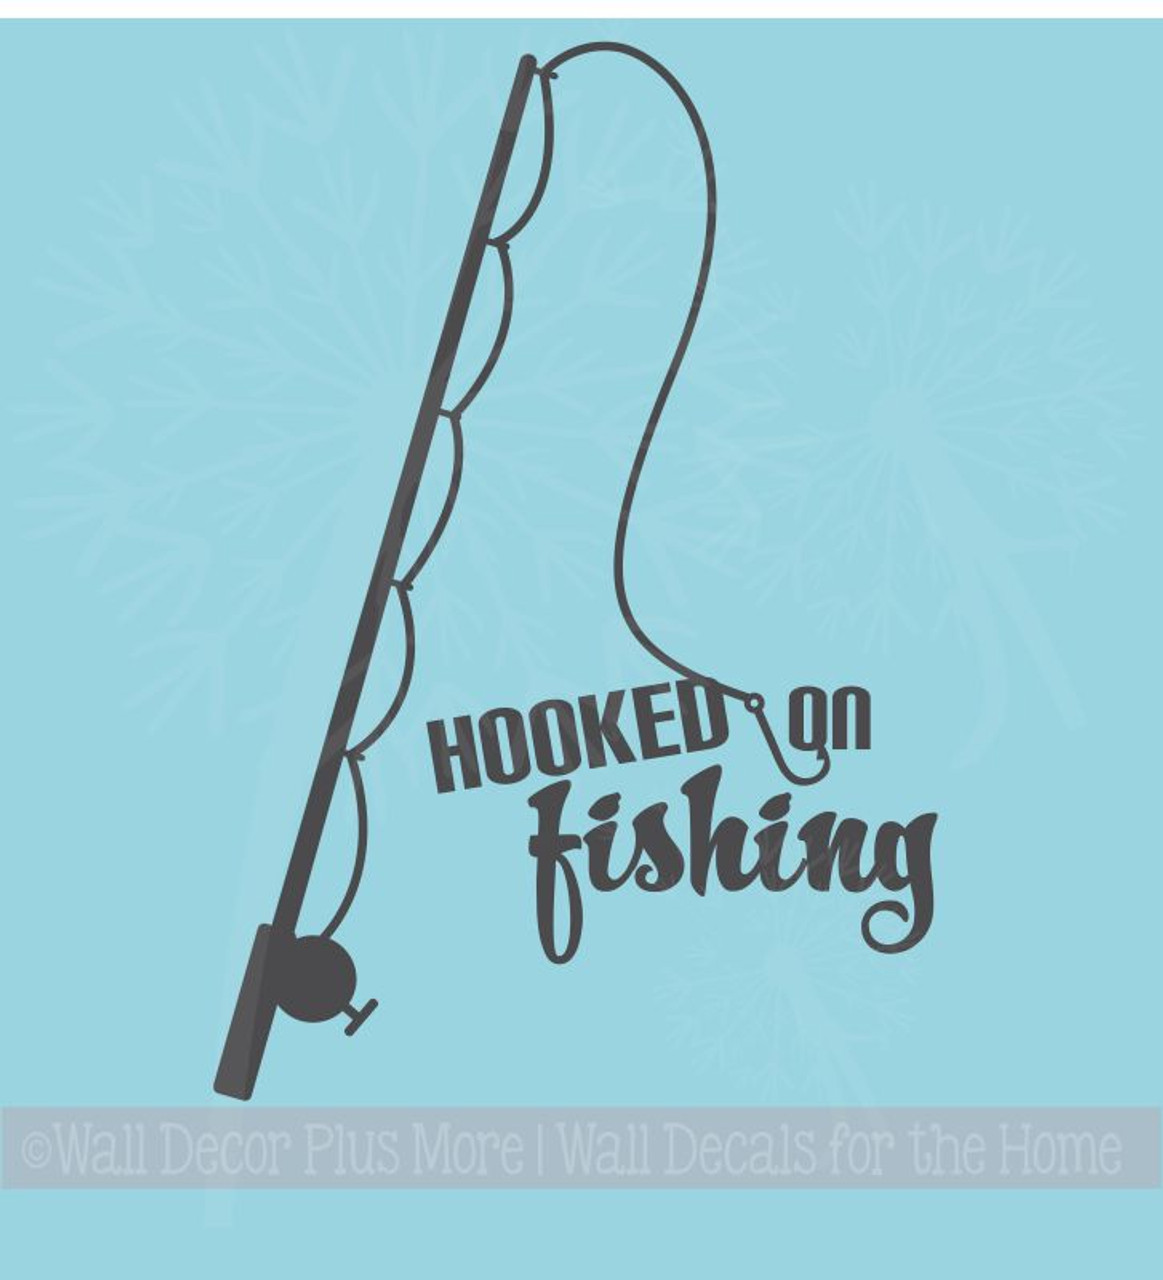 Baiting Hooks Bending Poles Lets Go Fishing Wall Decal Home Decor